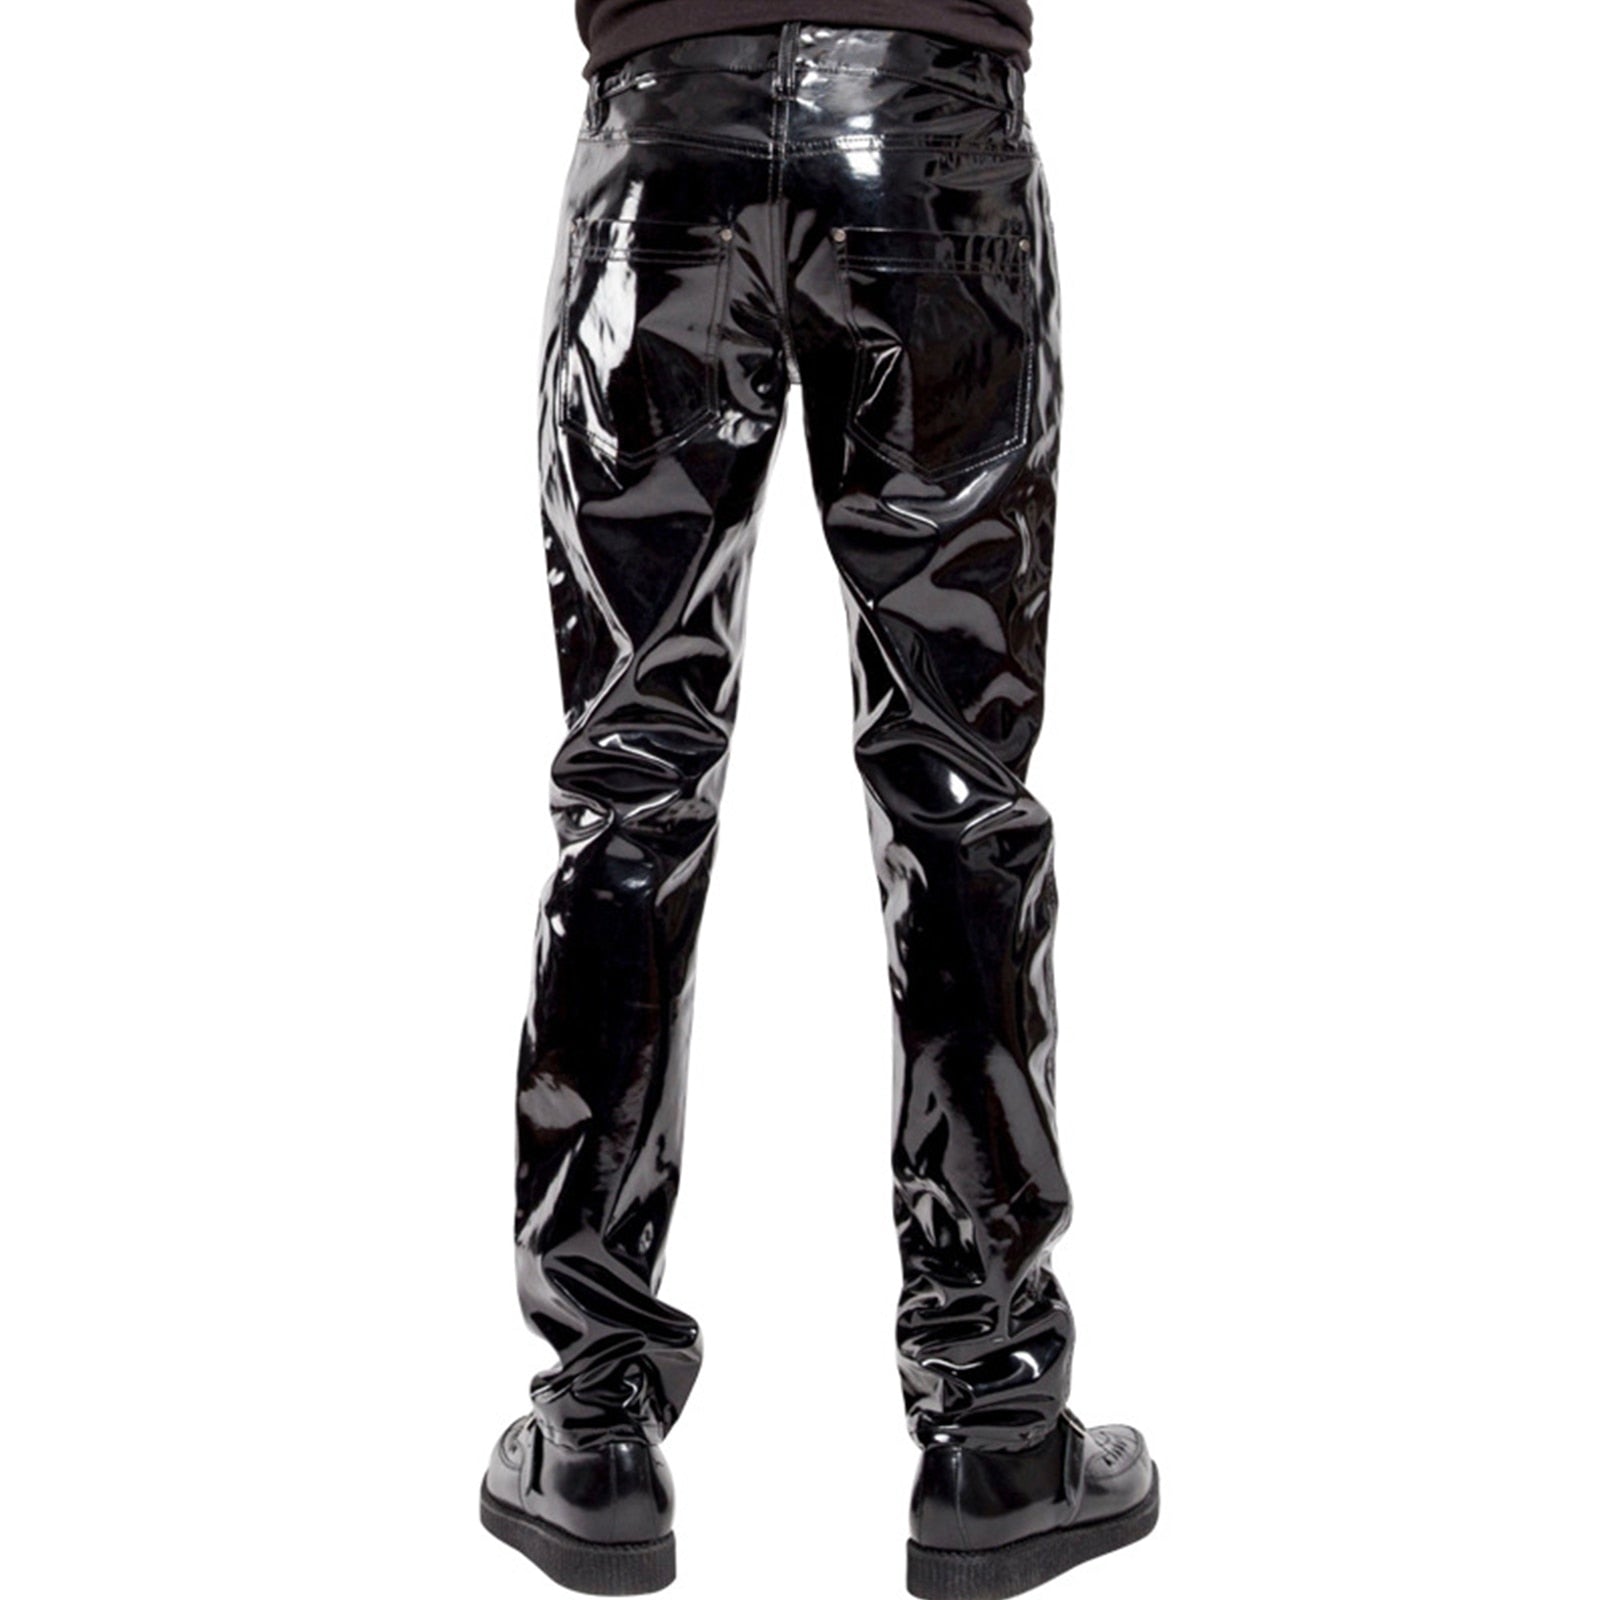 Fashion-forward Faux Leather PVC Pants with a Gothic Twist